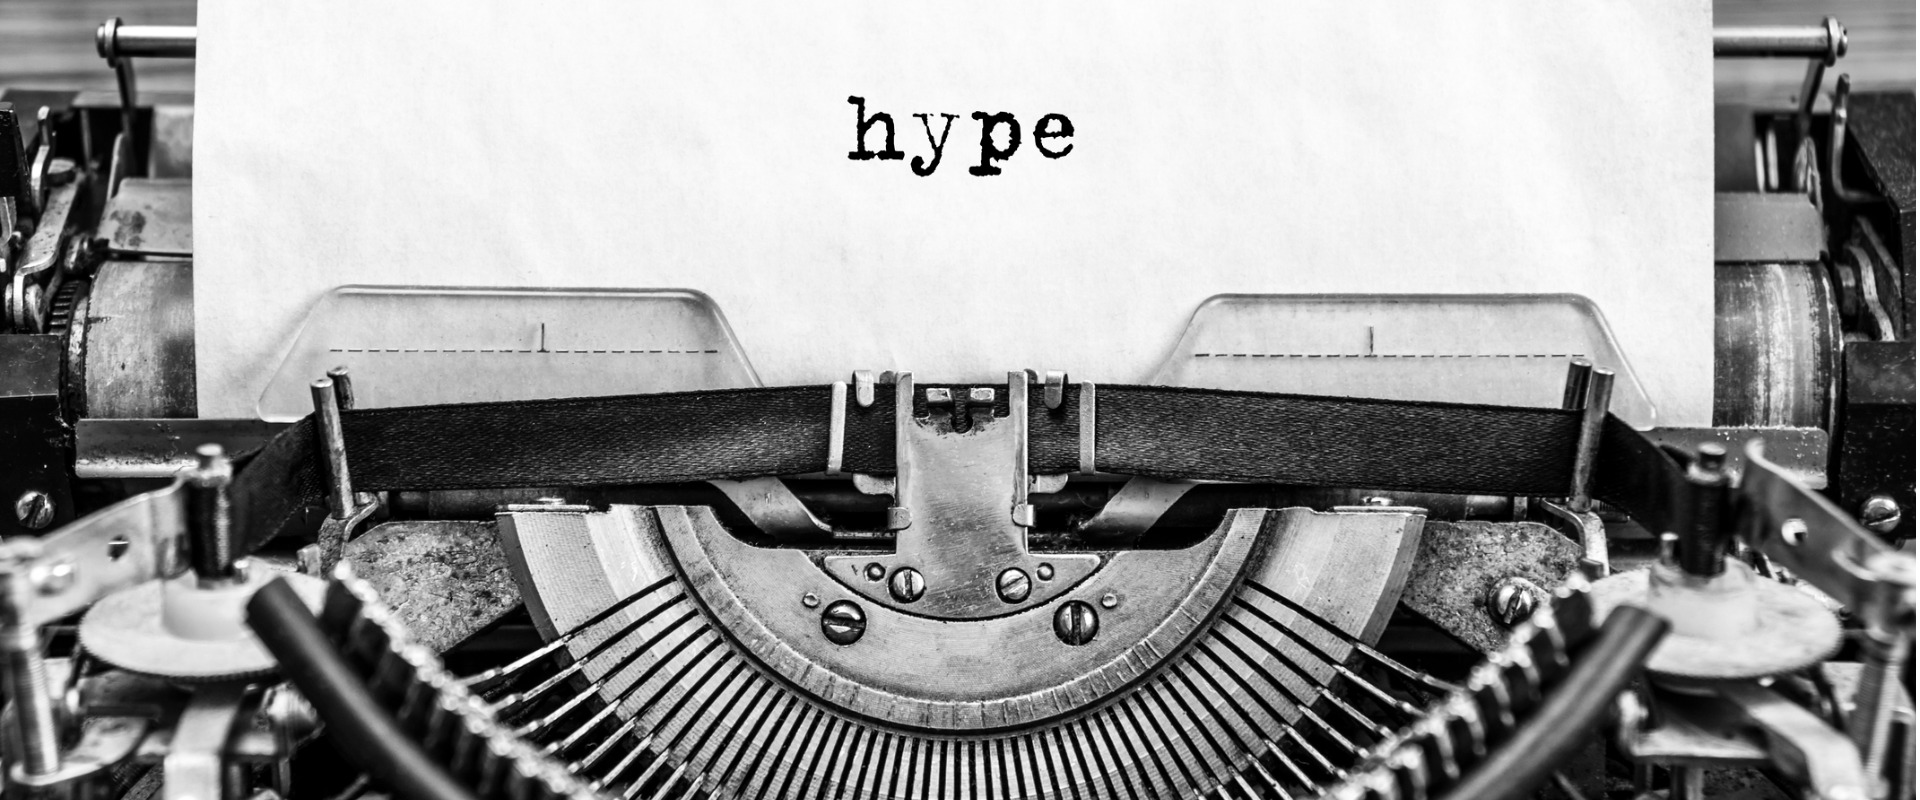 The word "hype" on a typewriter